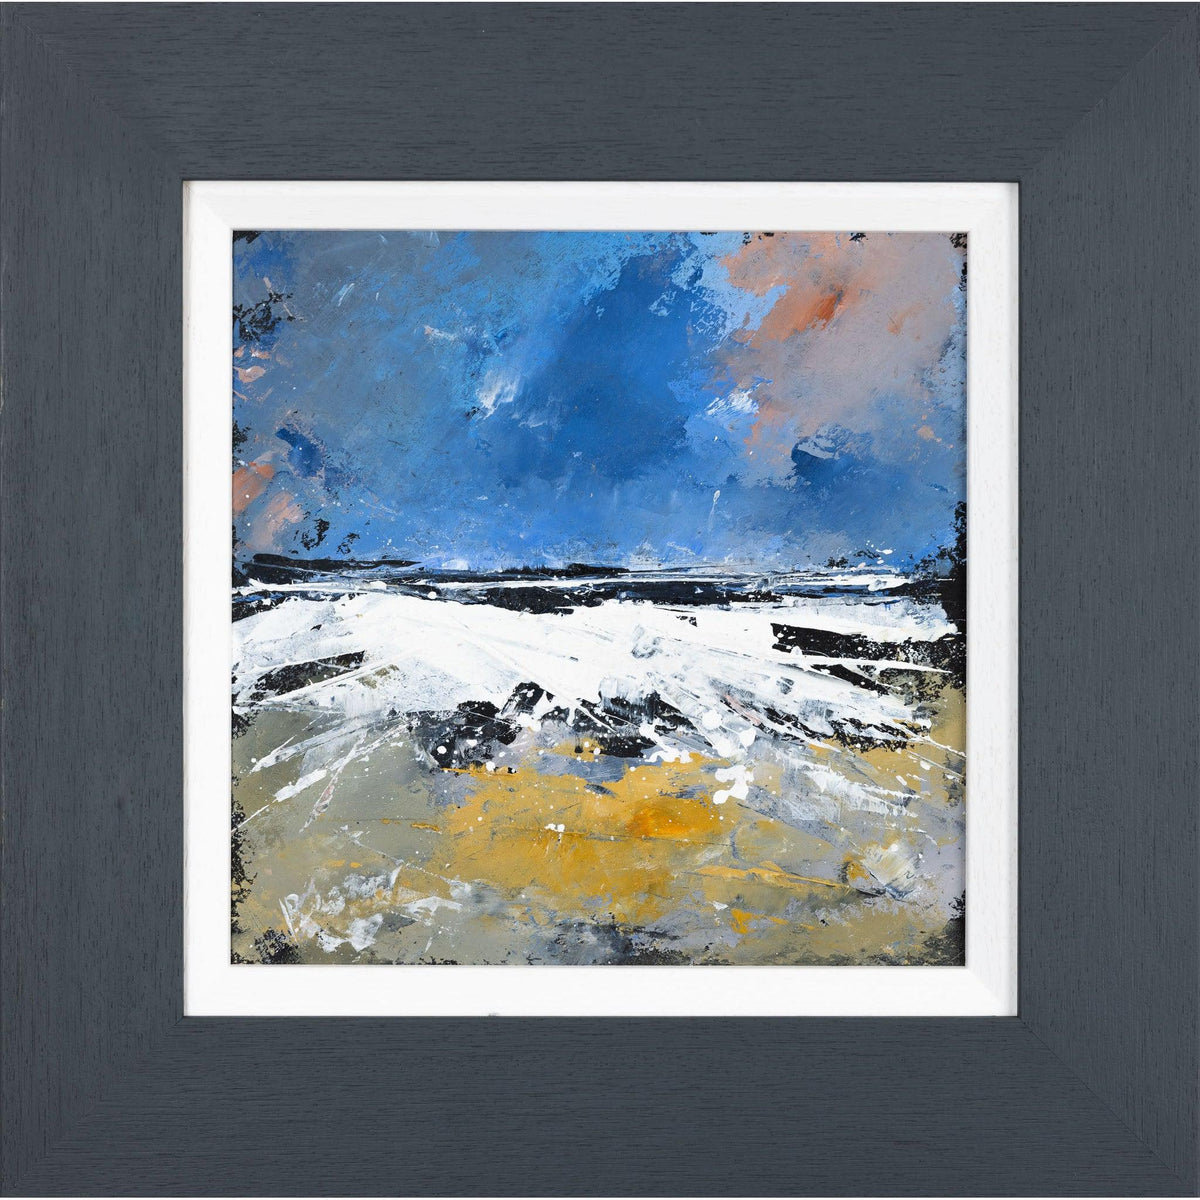 &#39;Beach Explosion&#39; oil on board original by Ian Rawnsley, available at Padstow Gallery, Cornwall